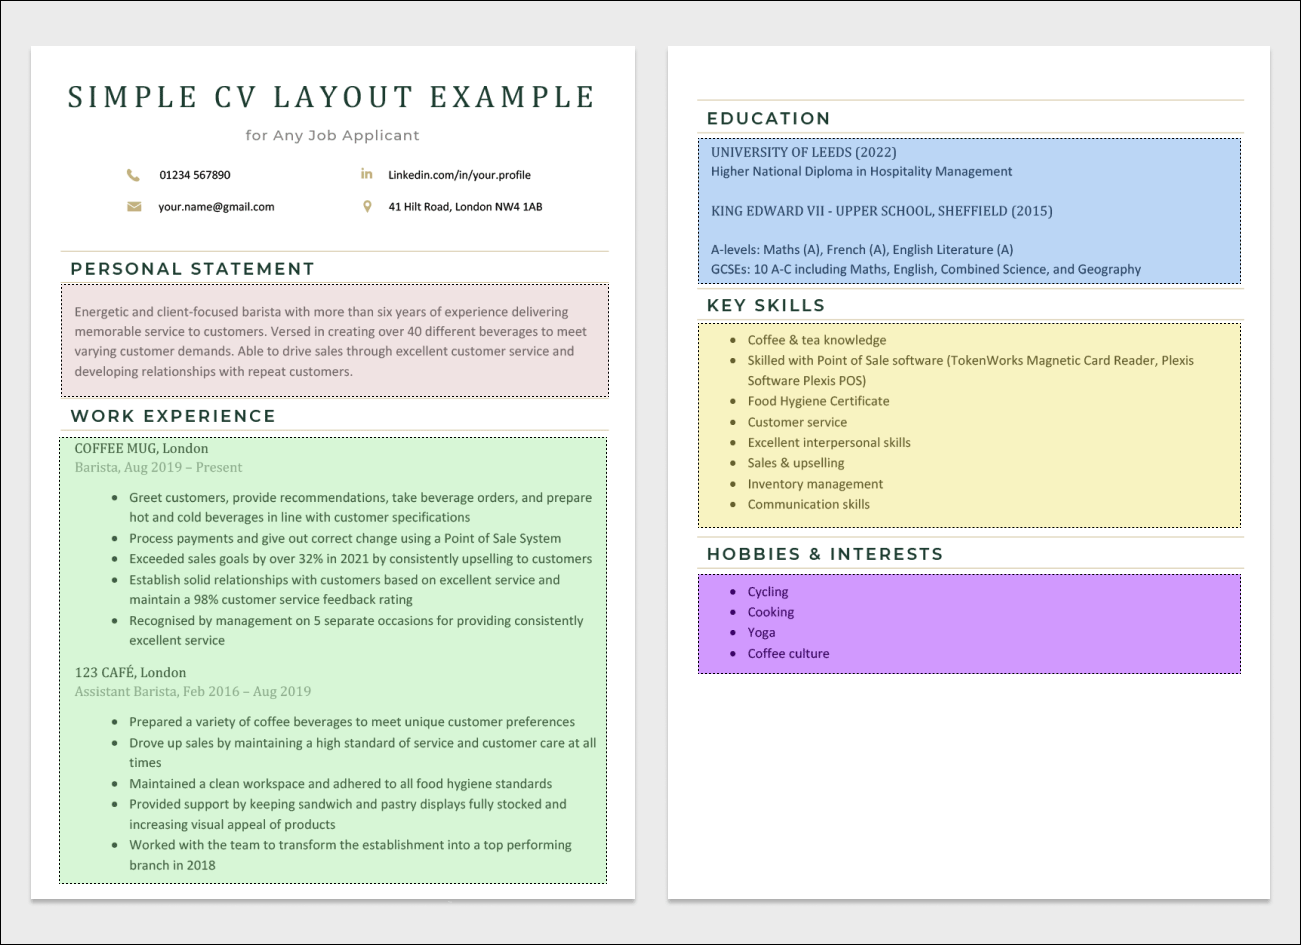 Two pages of a CV side-by-side on a light gray background to illustrate a simple CV layout